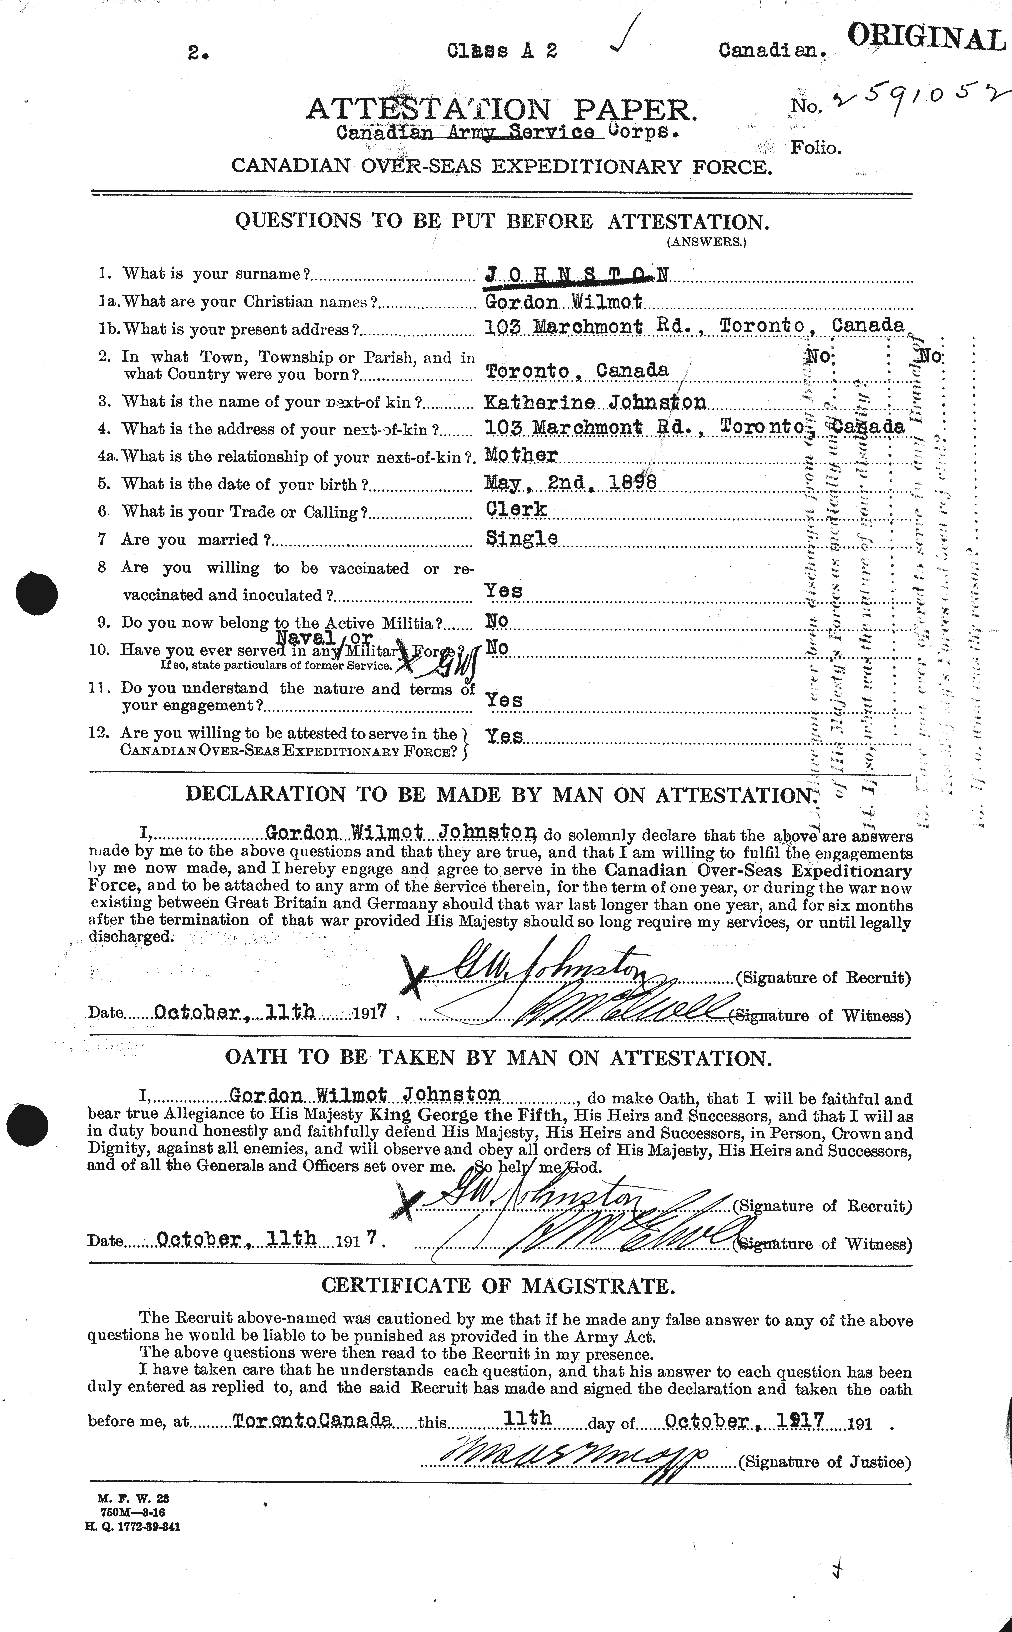 Personnel Records of the First World War - CEF 419474a